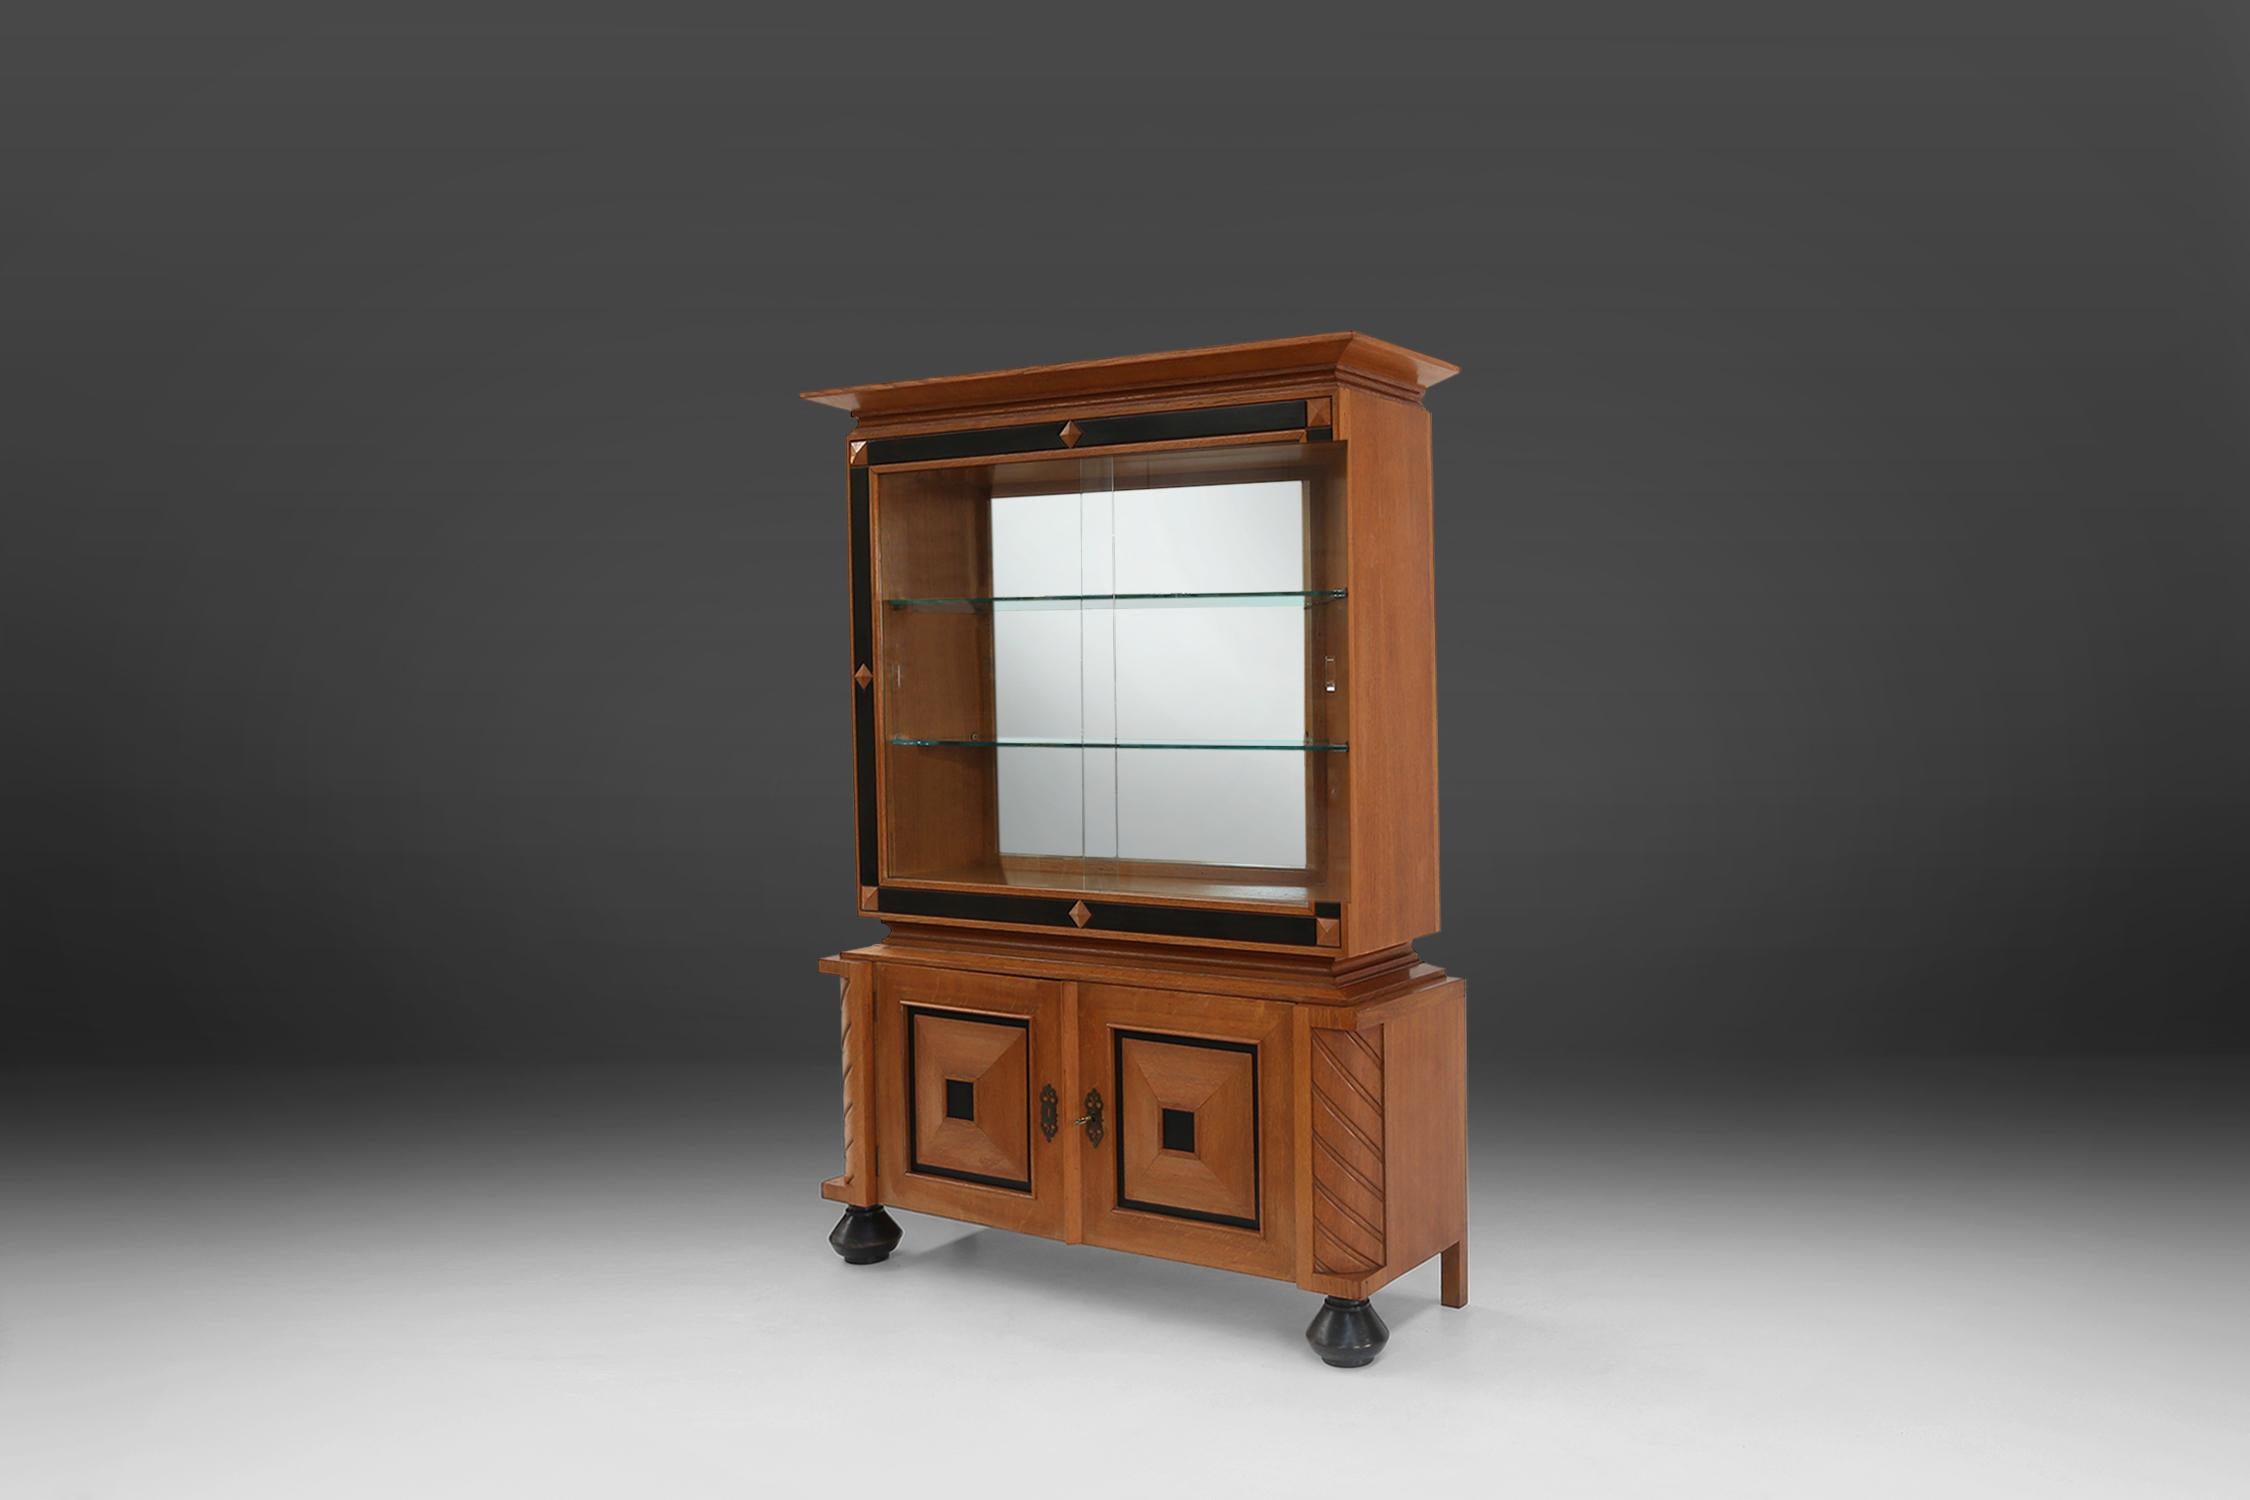 Robust cabinet features two square door panels, above these doors there is a vitrine.

A beautiful detail that makes it such a well-designed piece, are the black round legs. The black details are also reflected in the doors.